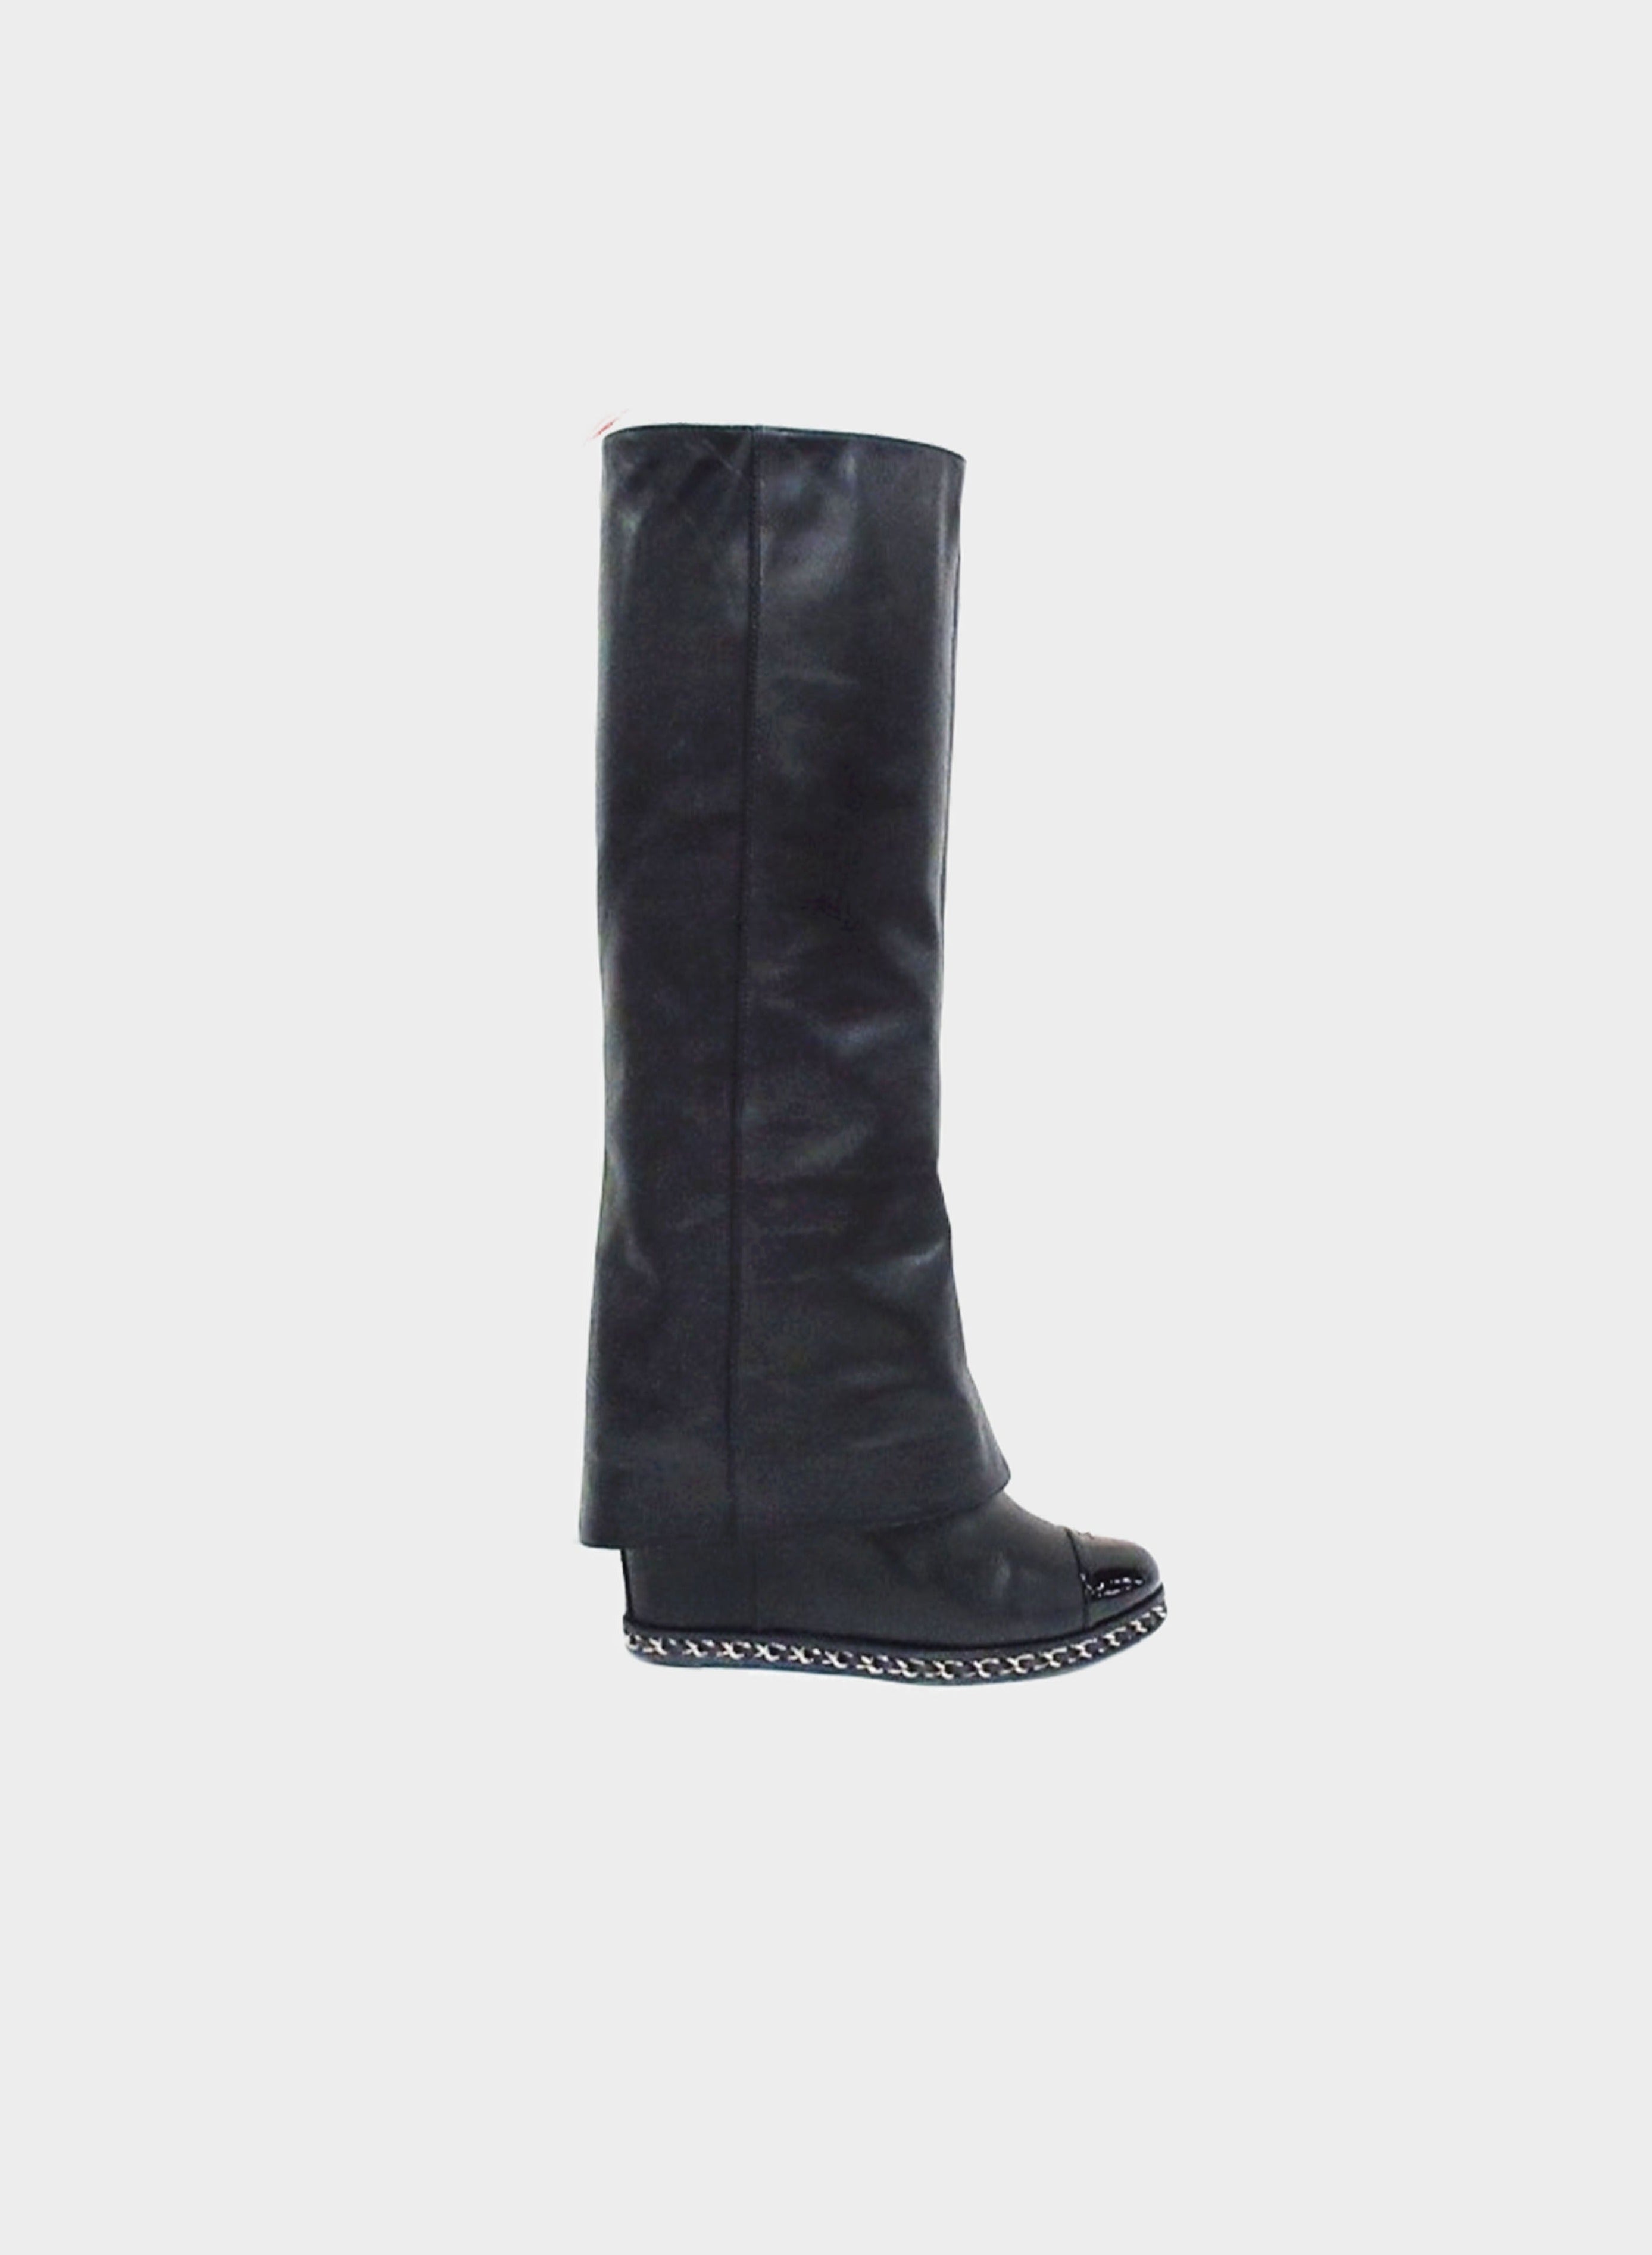 Chanel 2010s Black Leather Fold-over Wedged Long Boots